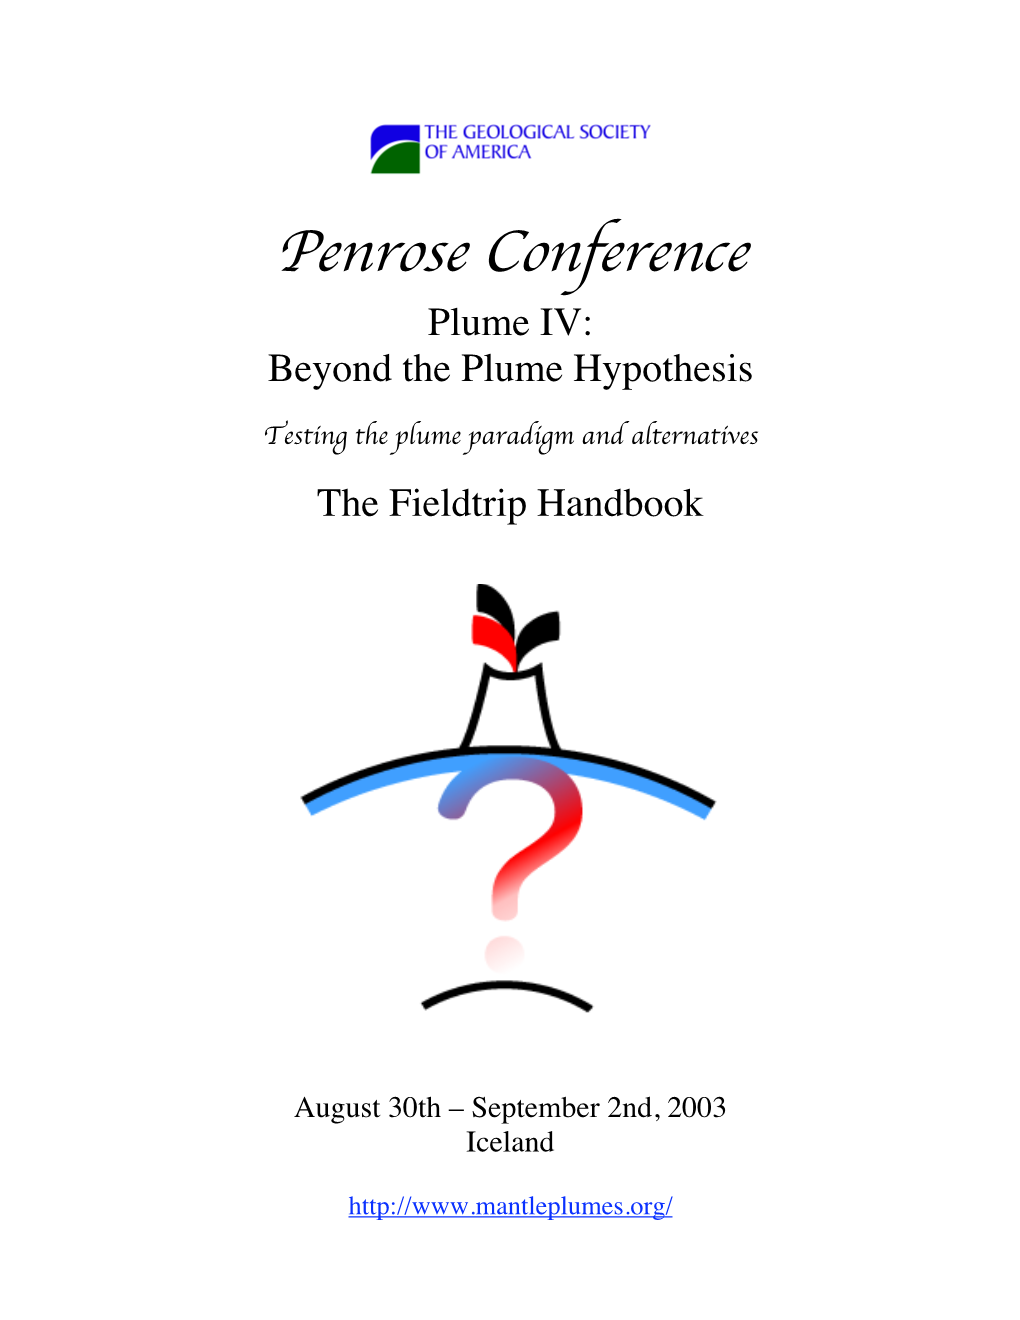 Penrose Conference Plume IV: Beyond the Plume Hypothesis